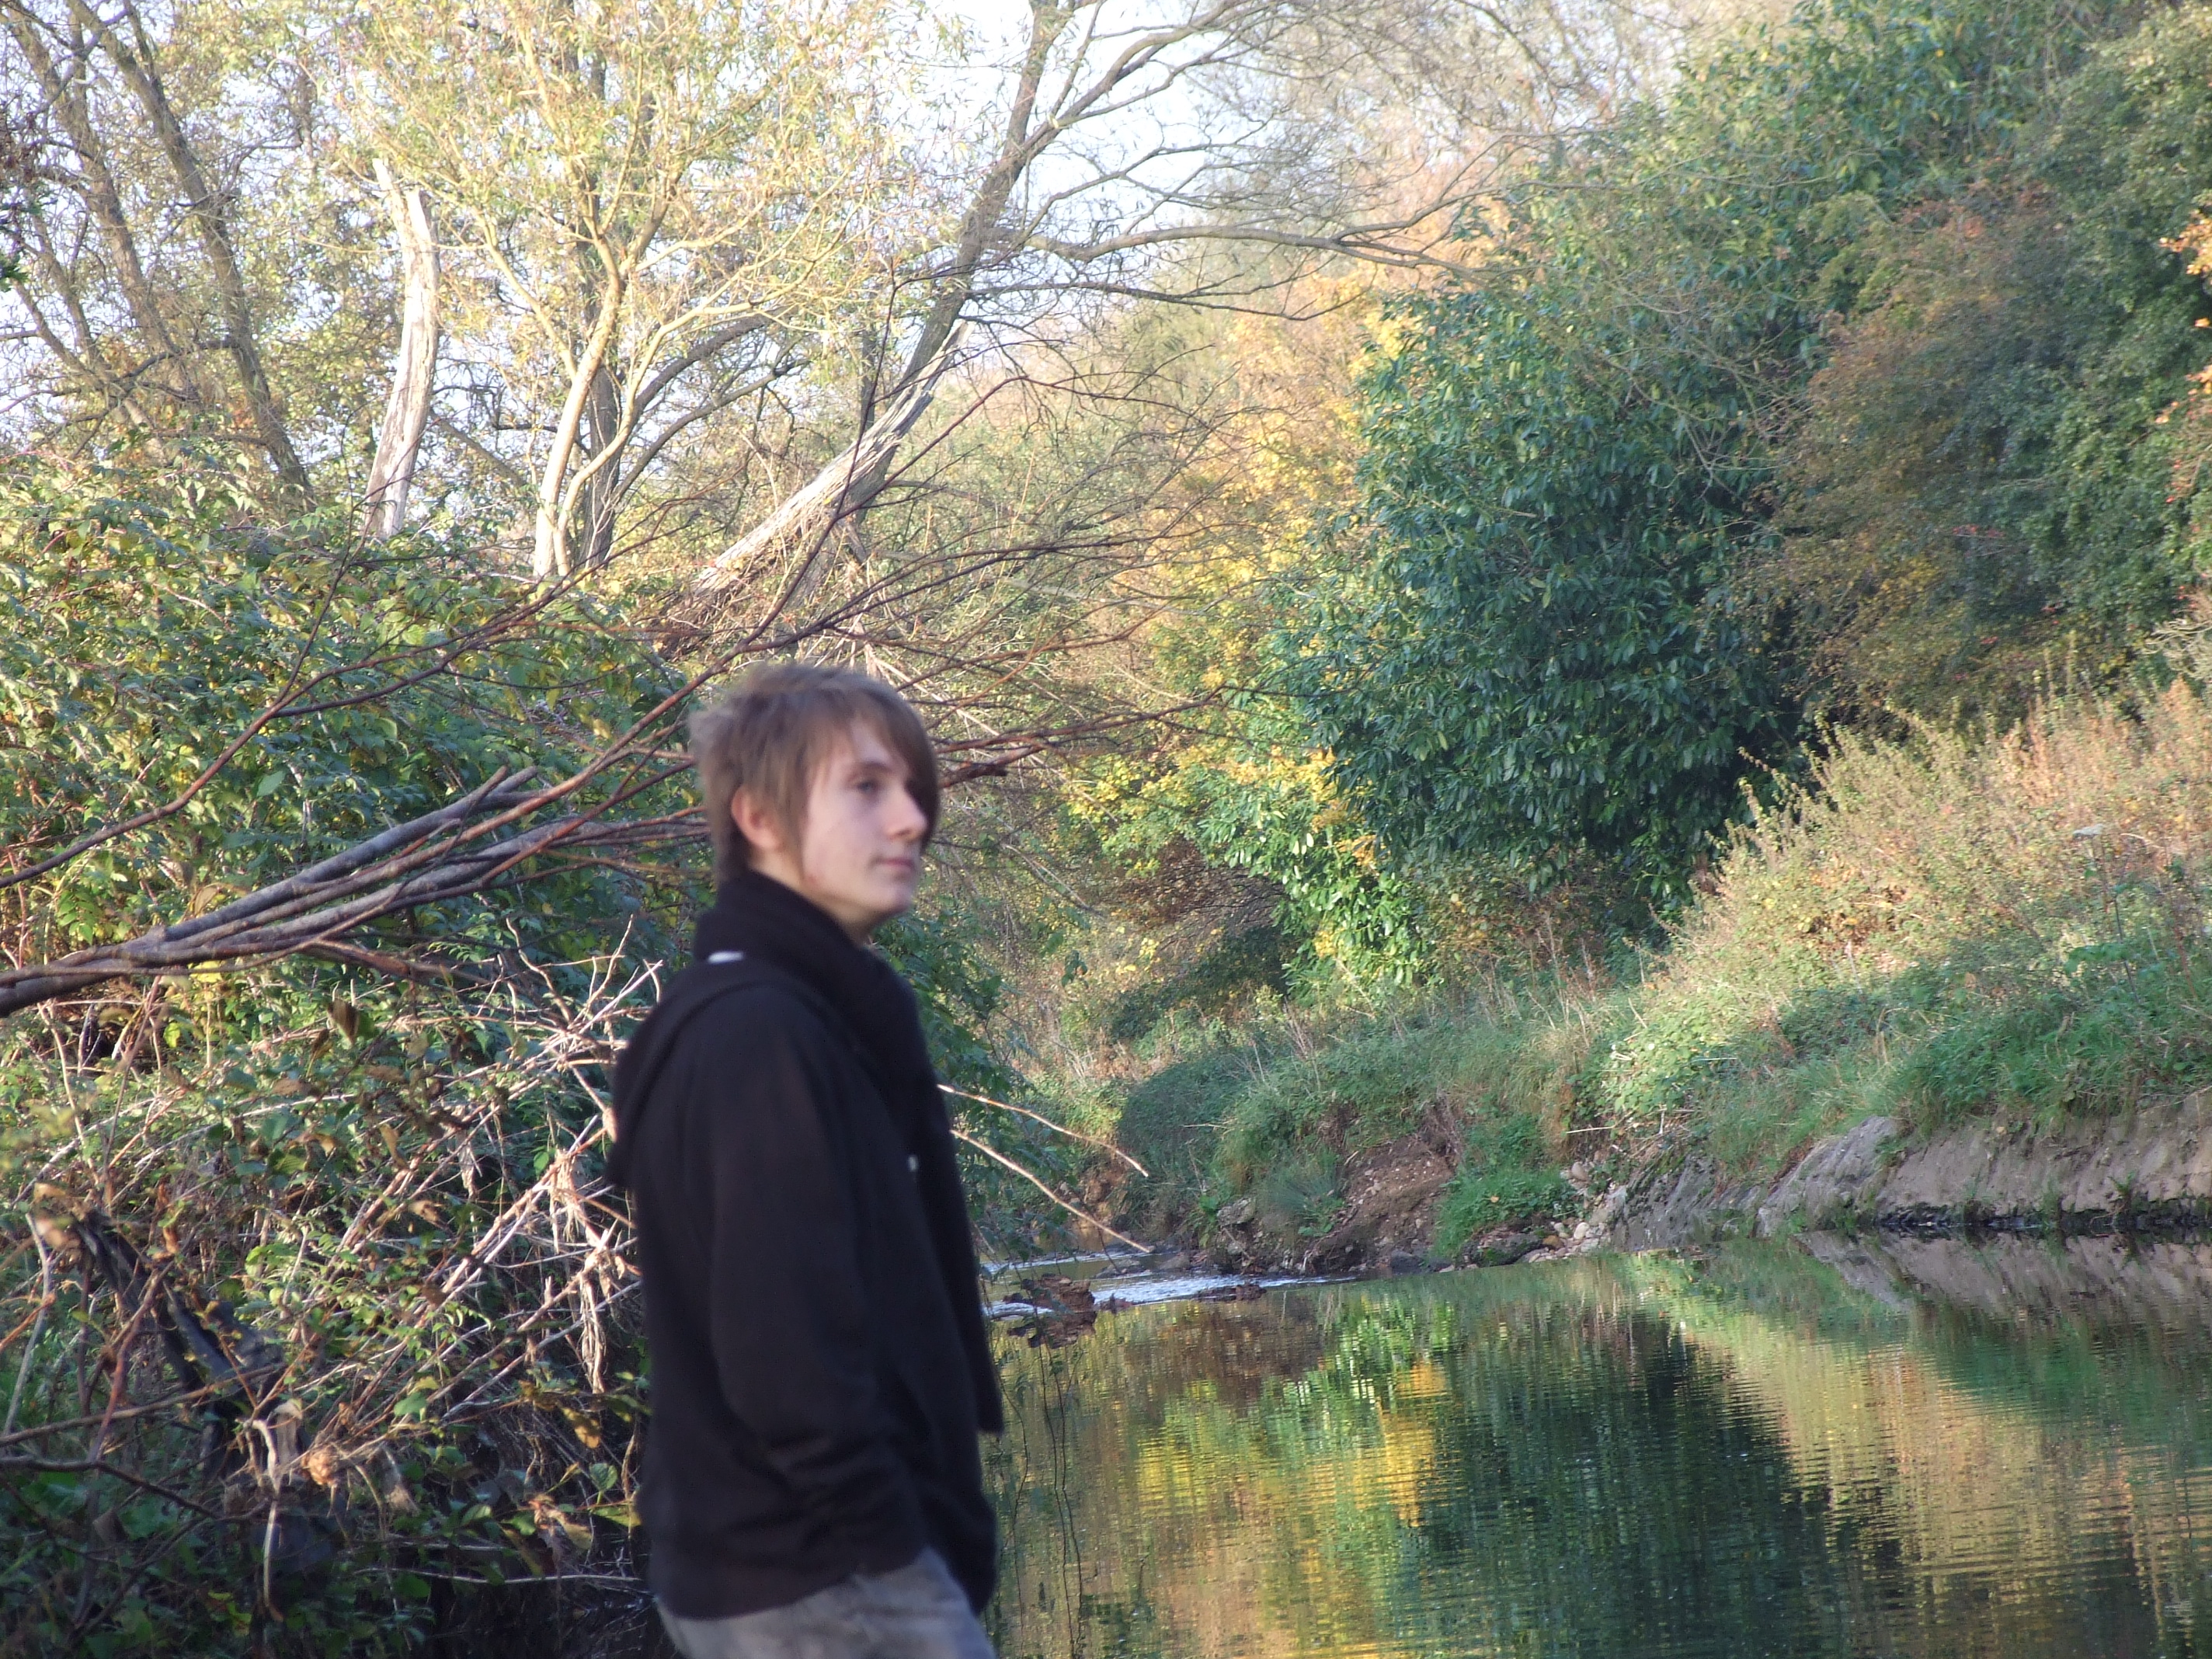 Emo kid in nature photo